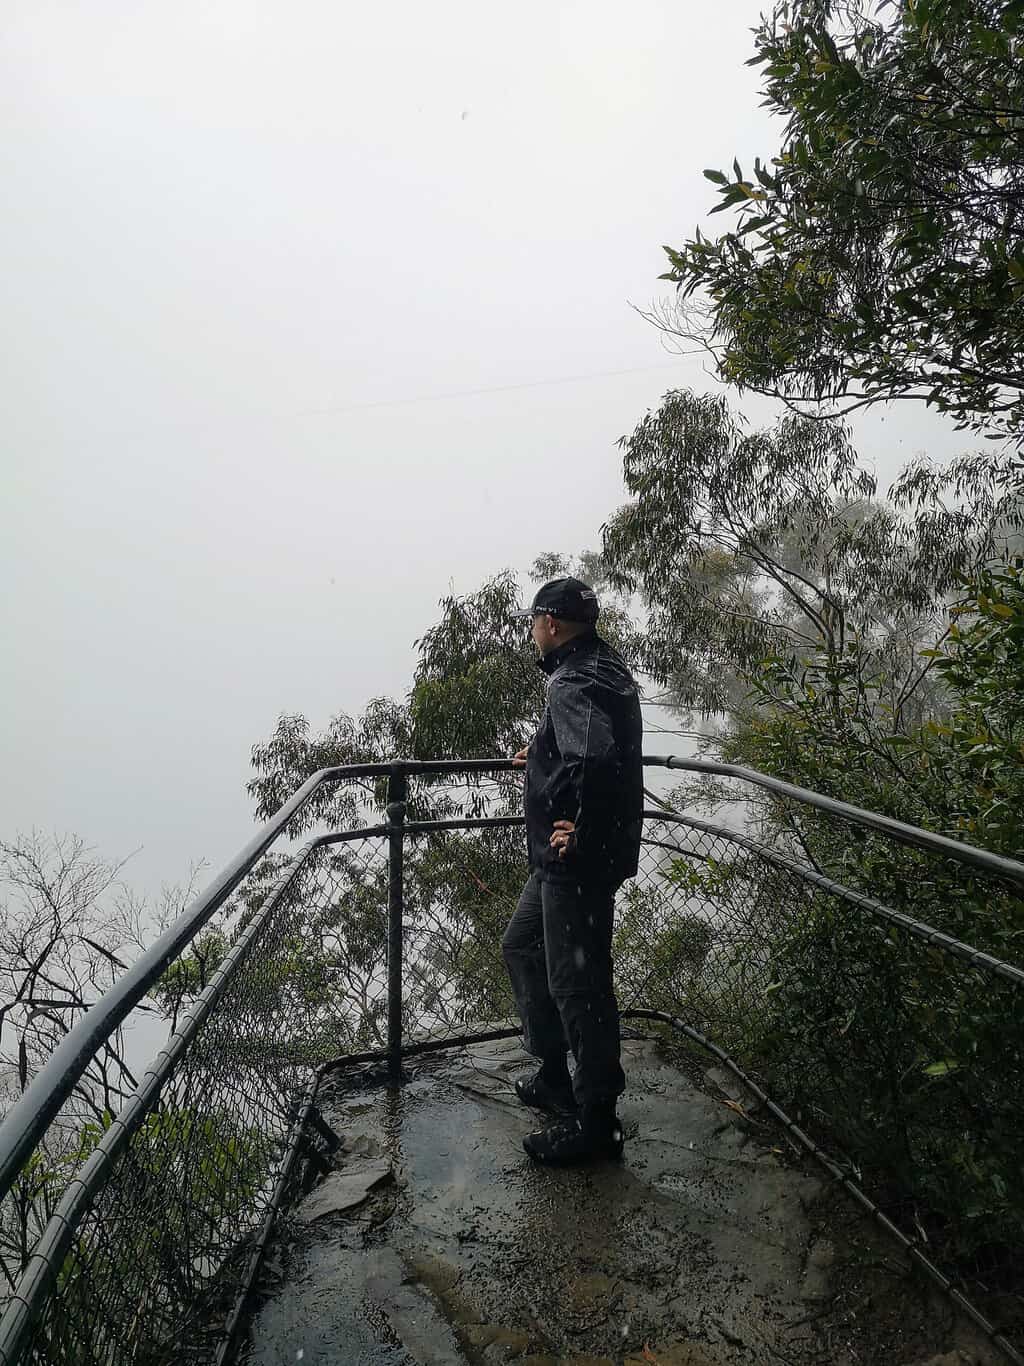 A wall of thick cloud hides any views at the Furber lookout Viewpoint